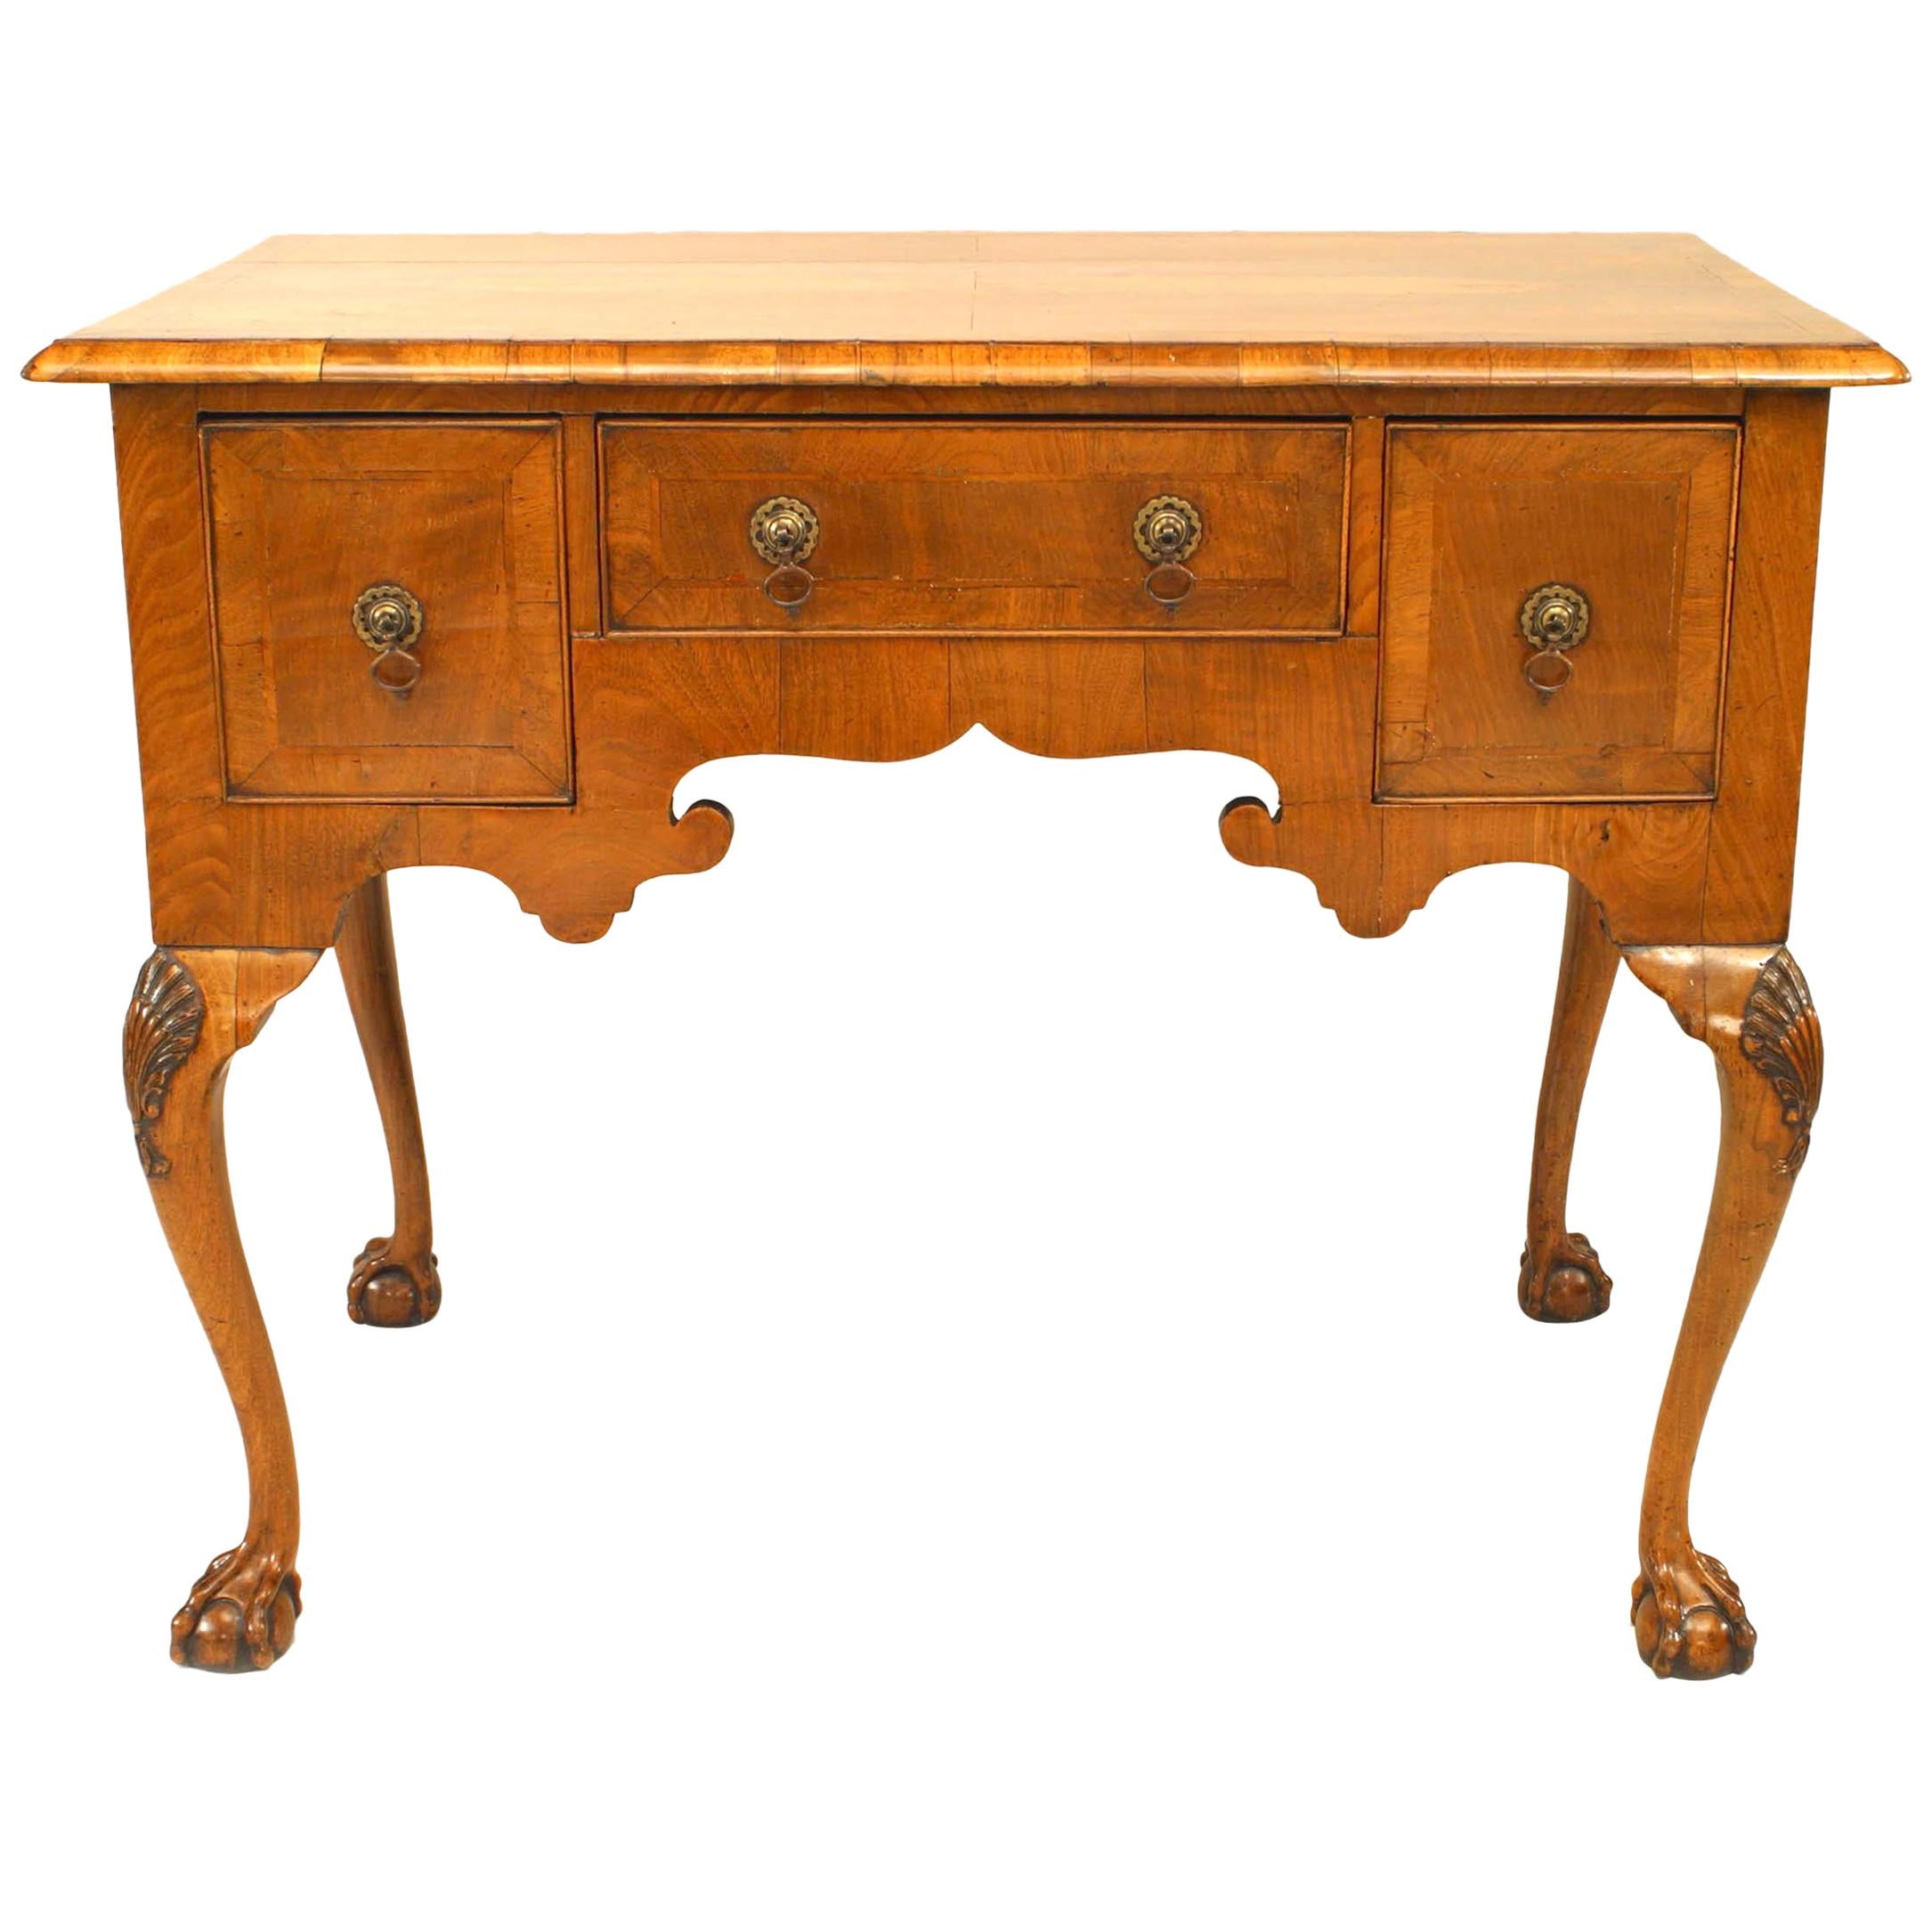 English Chippendale Style Lowboy, 18th Century